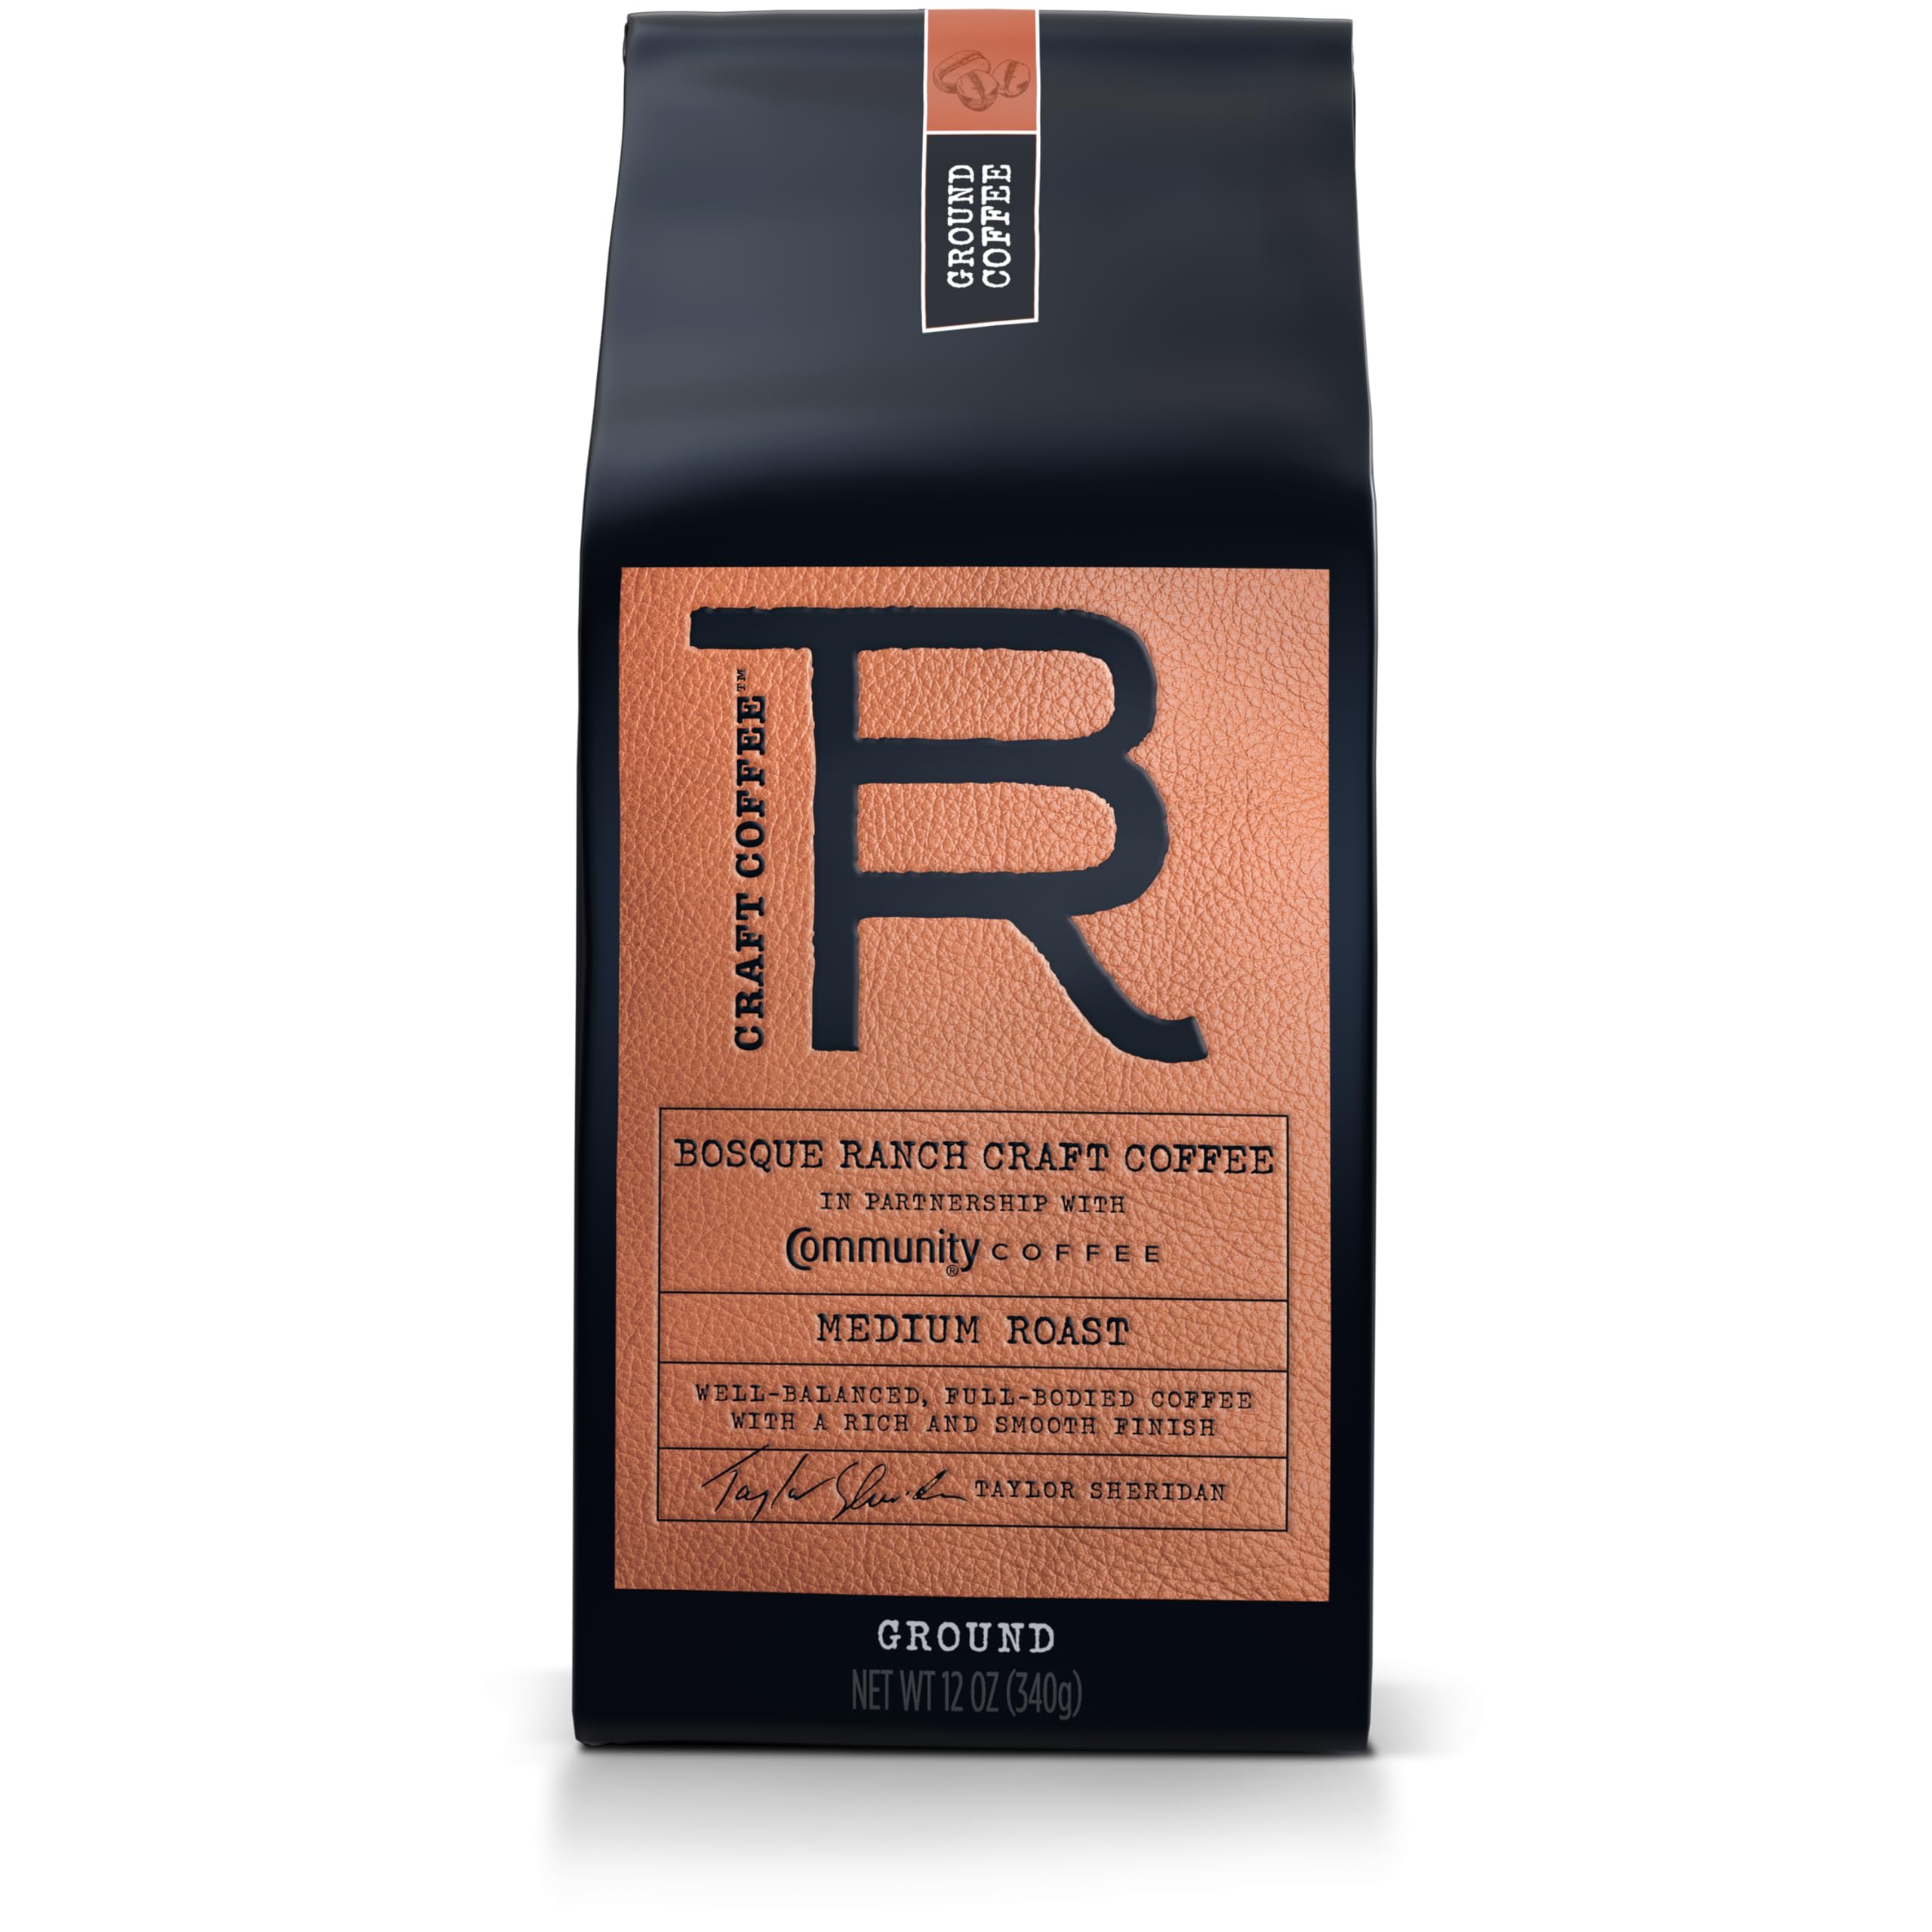 Save 28% on Bosque Ranch Craft Coffee™ Ground From Taylor Sheridan, 12 Ounce Bag (Exp 4/30) $10.03